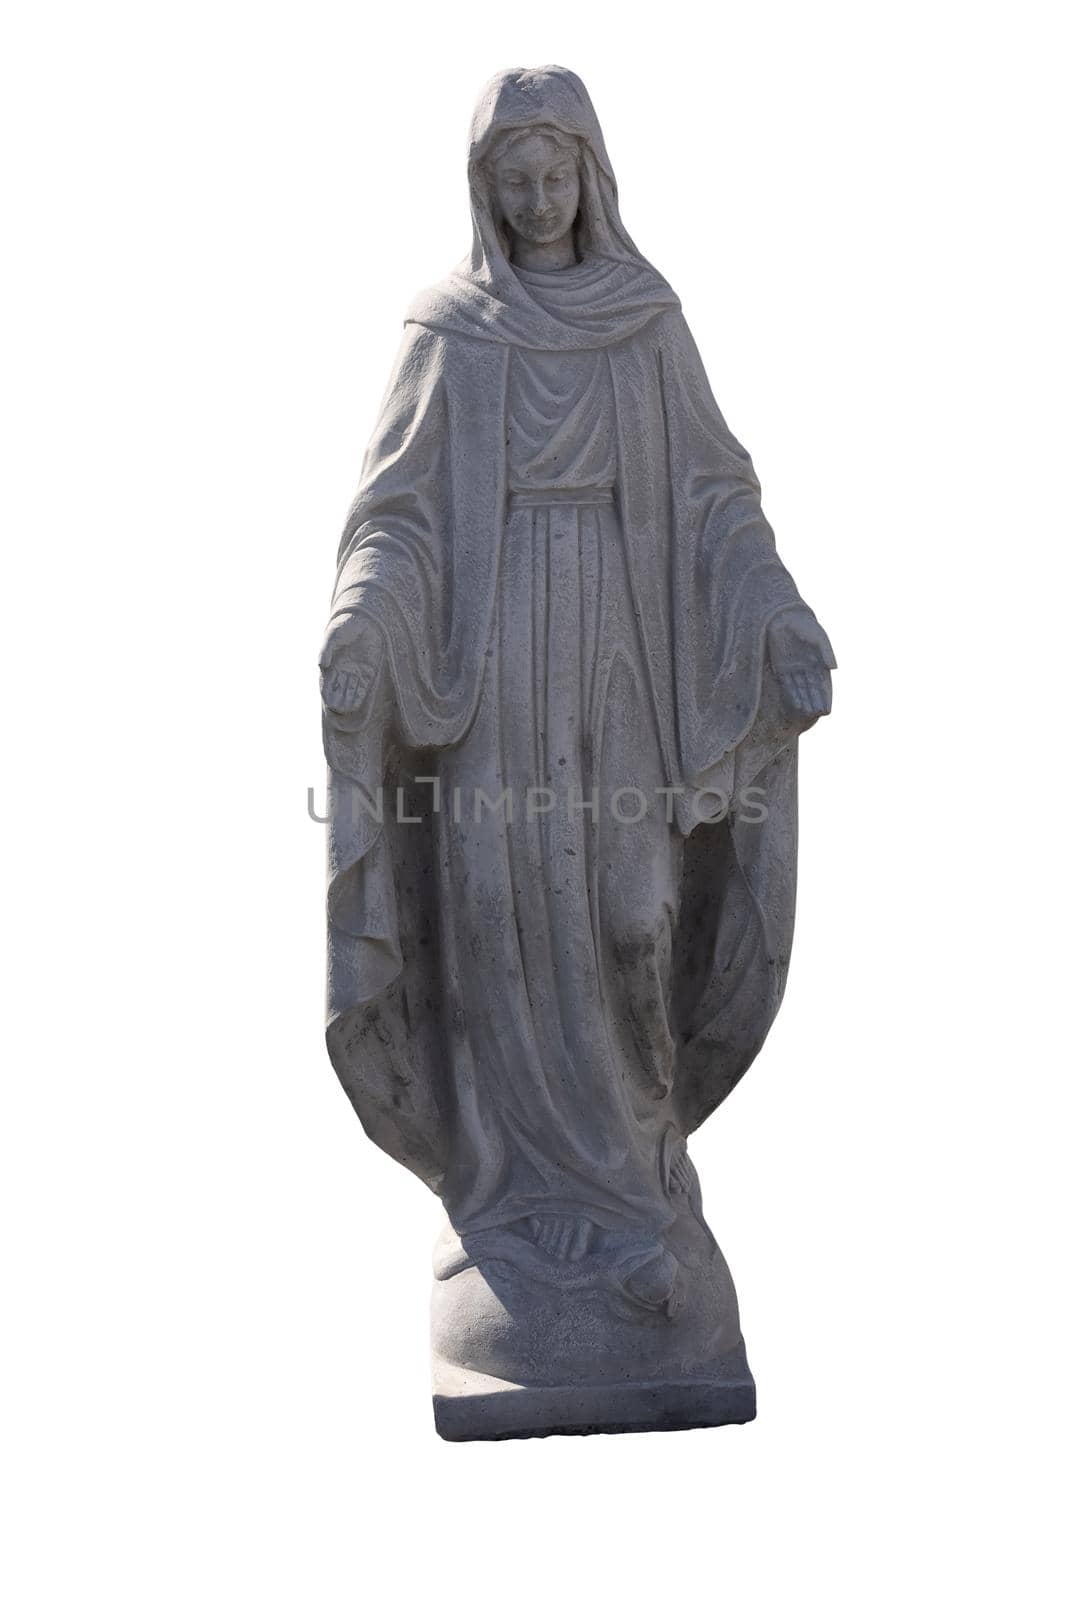 Stone sculpture of virgin mary on white background by Wavebreakmedia